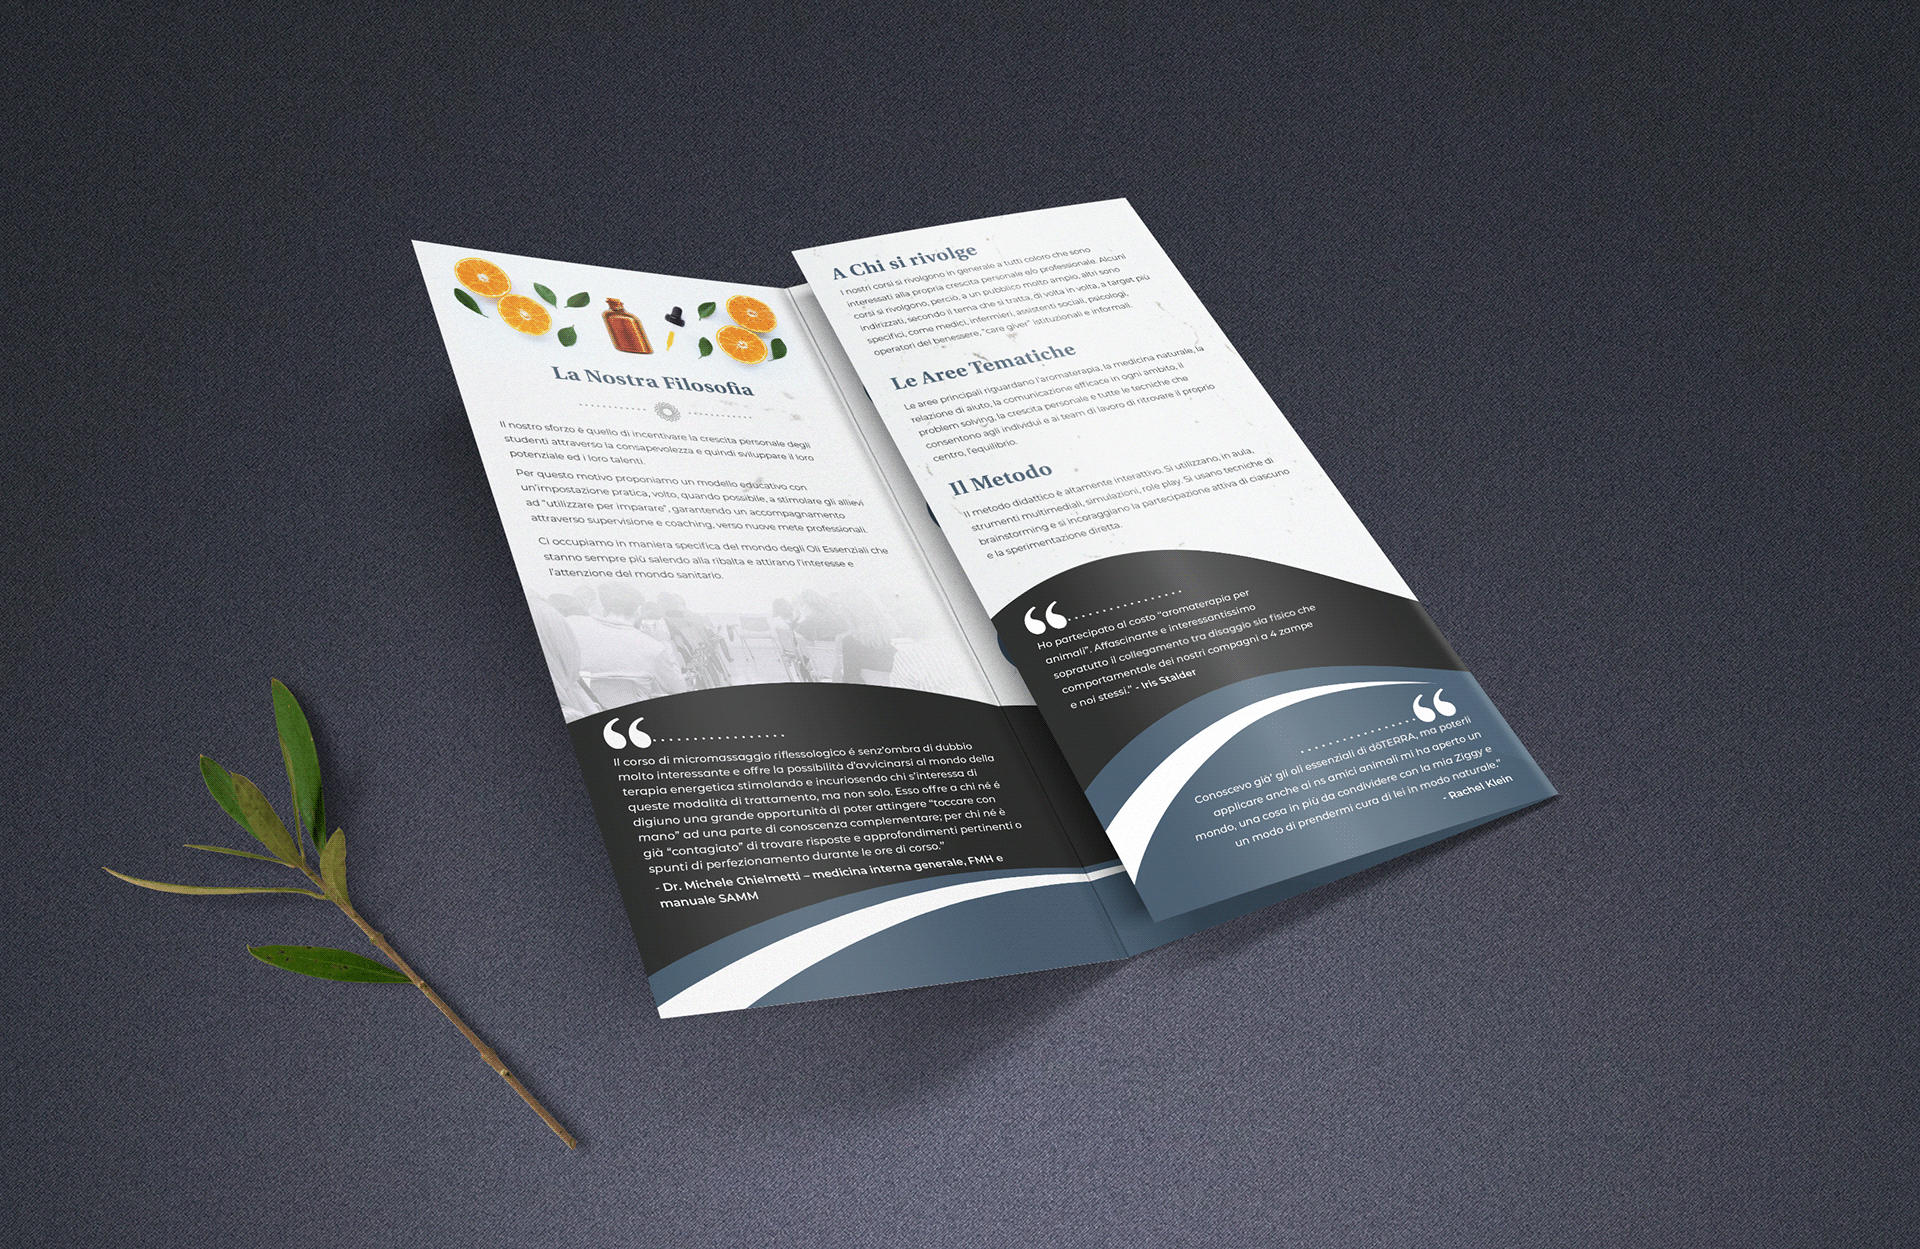 Trifold Brochure Design about Aromatherapy by Elivera Designs